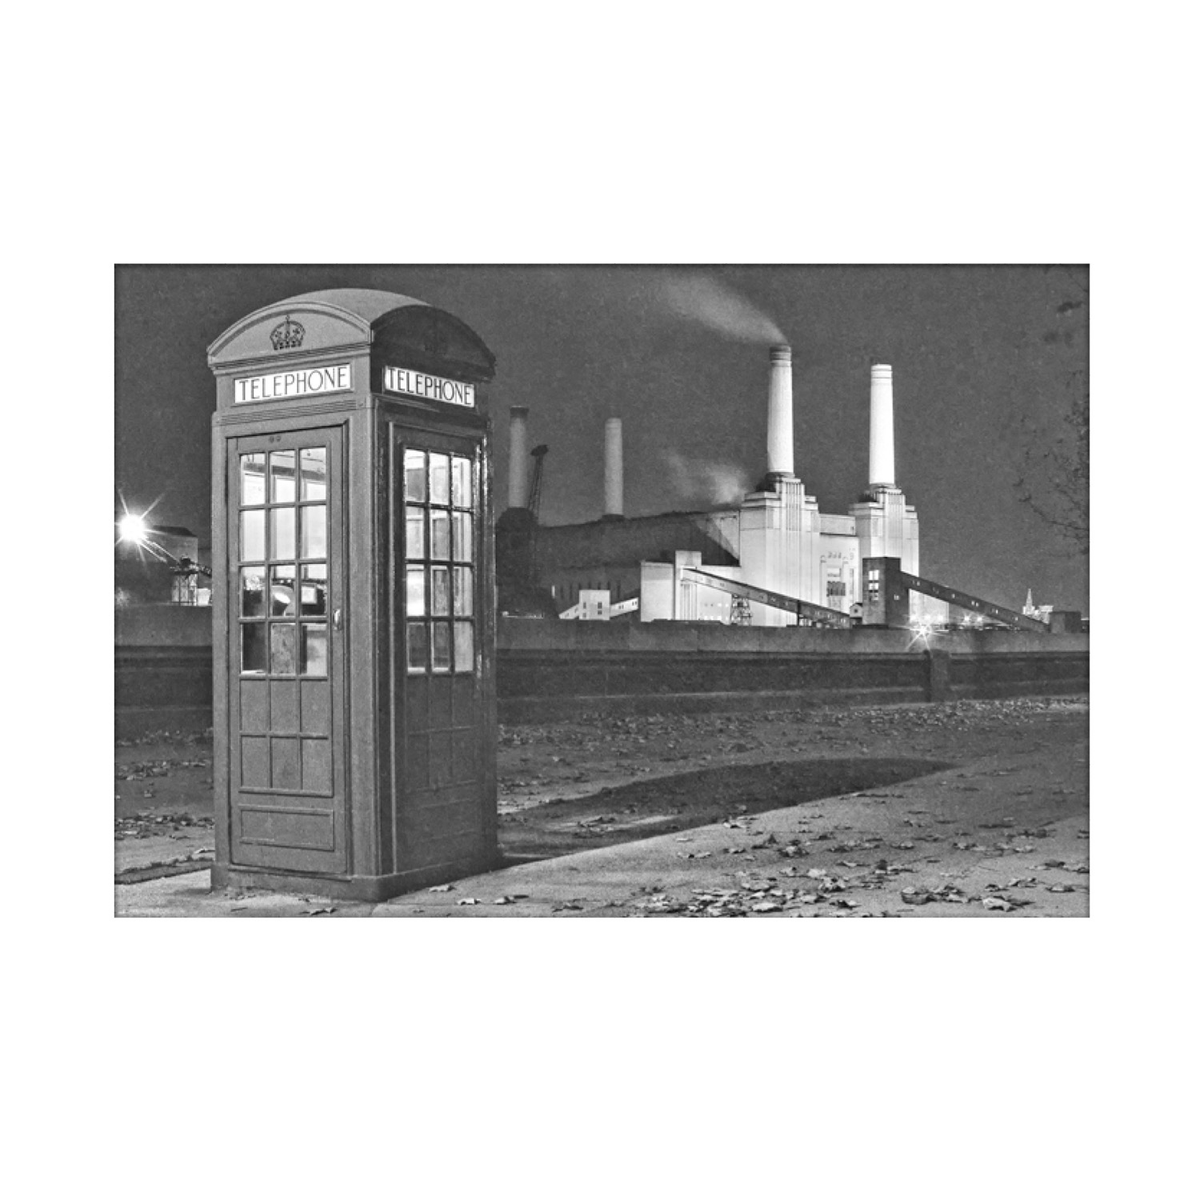 PhoneBox Prints - Limited Edition